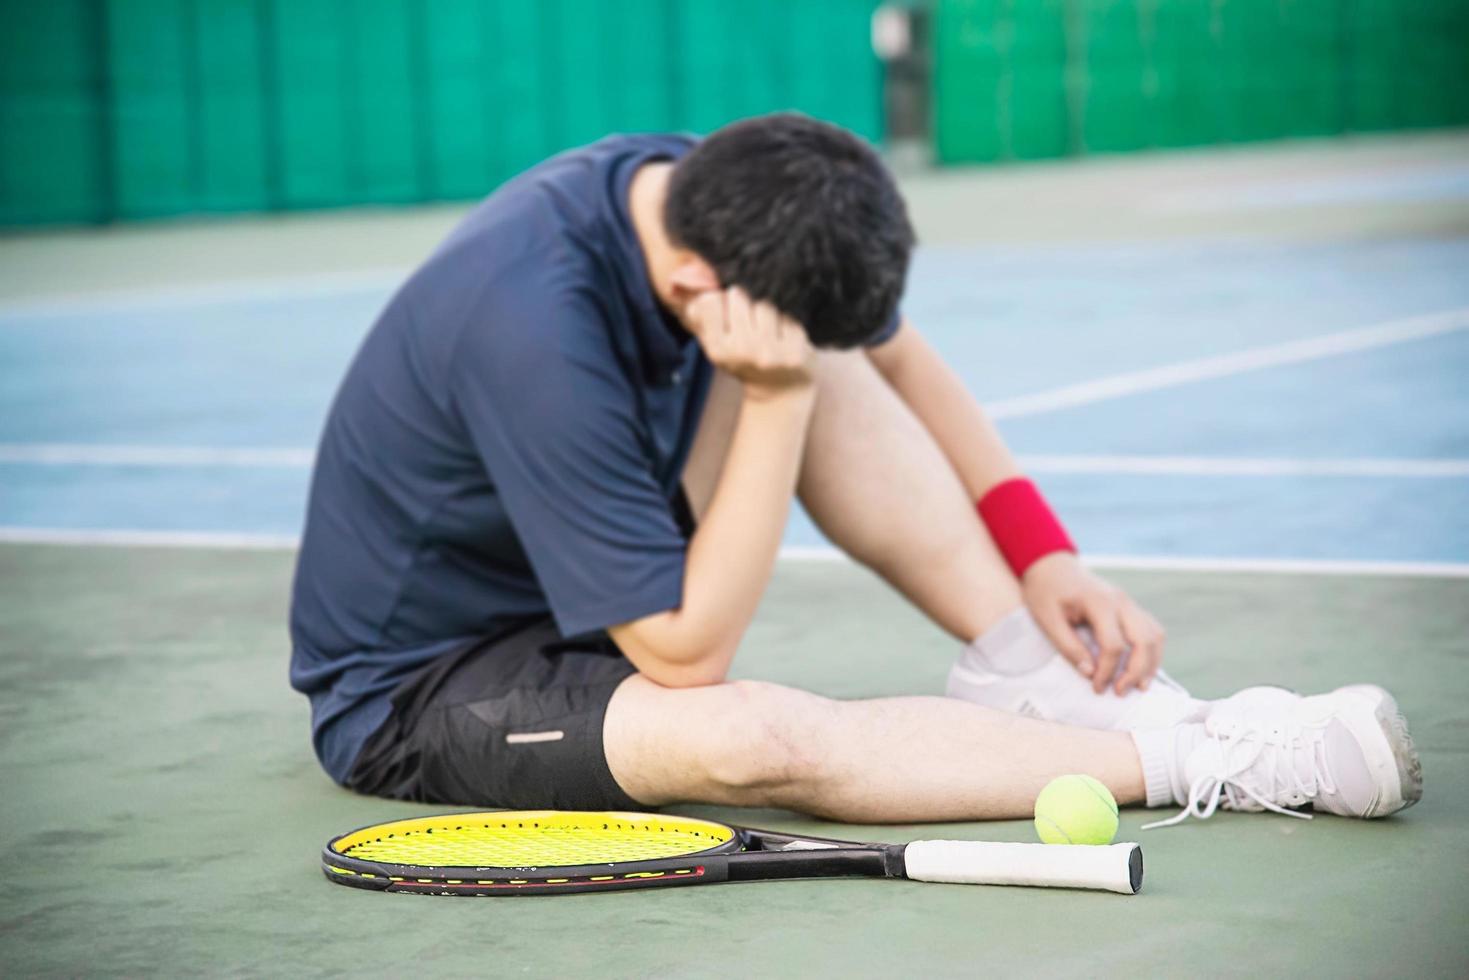 Sad tennis player sitting in the court after lose a match - people in sport tennis game concept photo